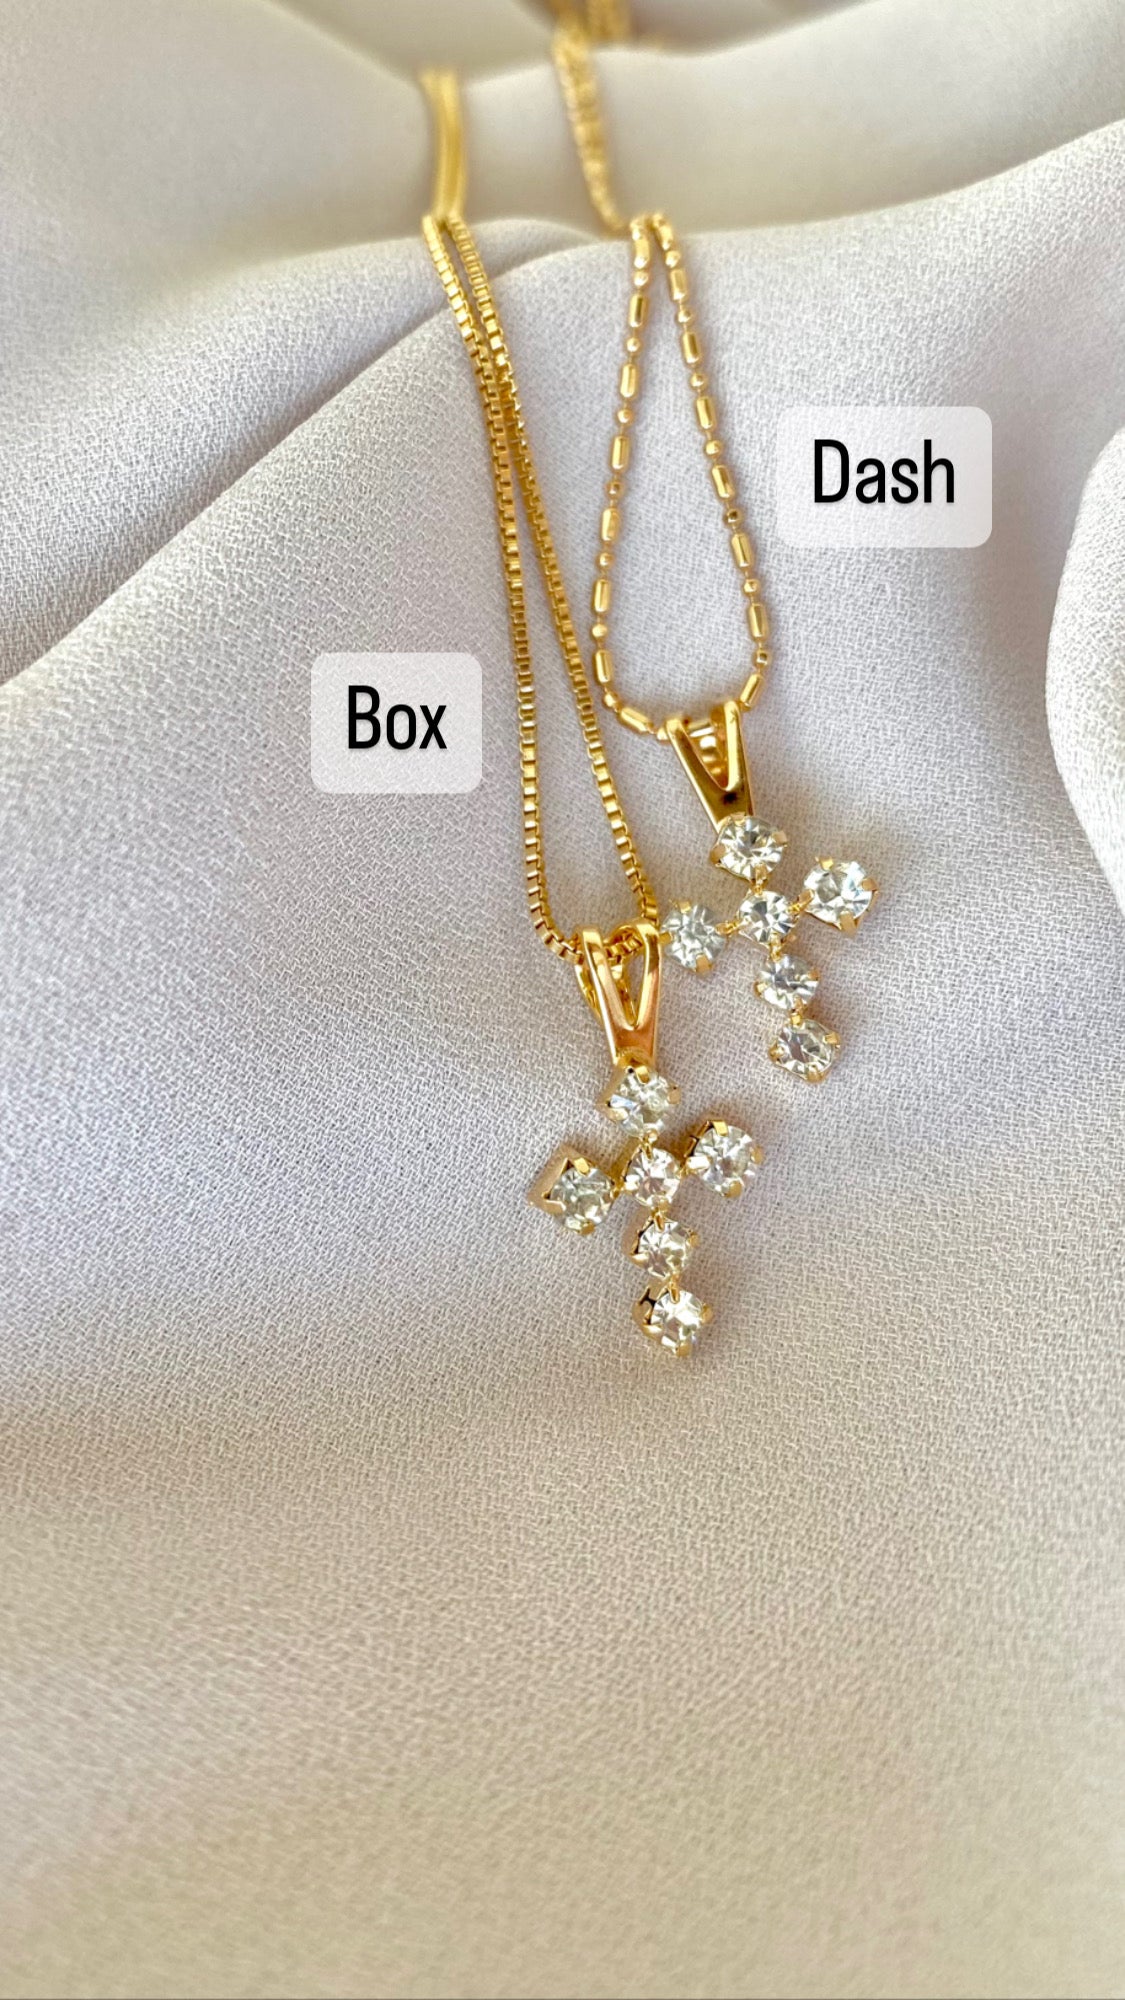 Dainty Cross Necklace Gold Filled Chain Crystal Covered Cross Pendant Pave Cross Charm Christian Jewelry Baptism Christmas Gift CZ Cross